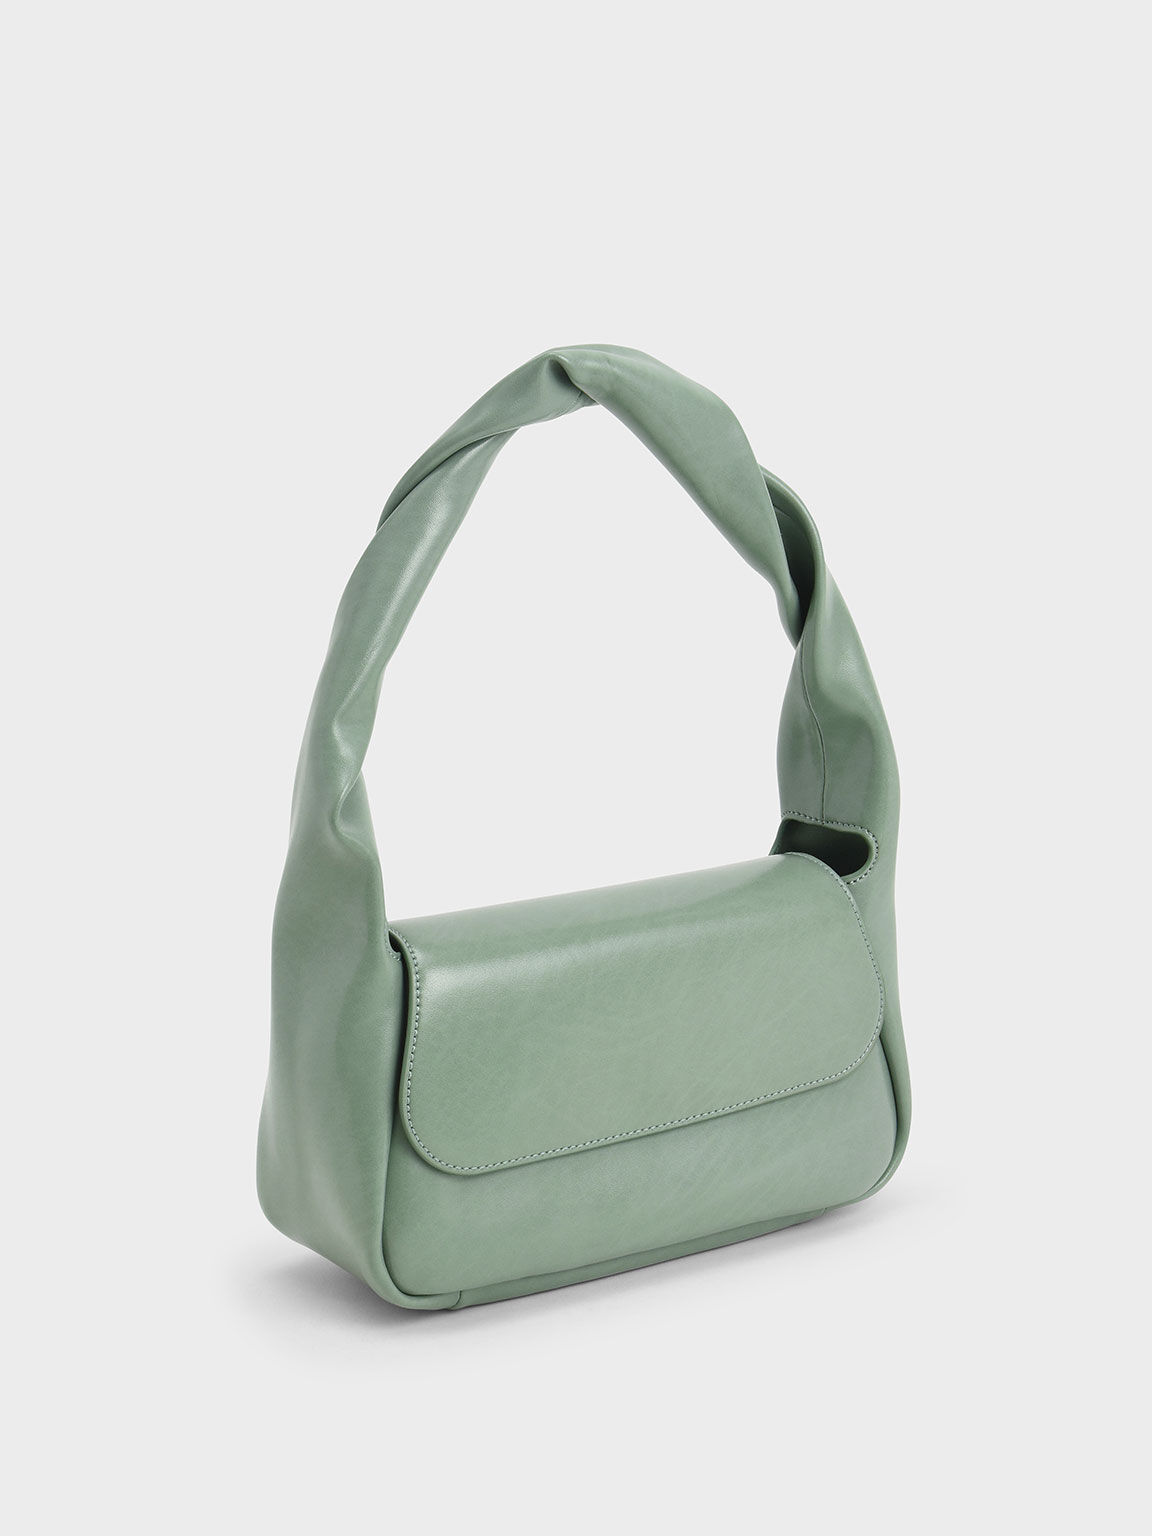 CHARLES & KEITH - Product featured: Willow twist top handle